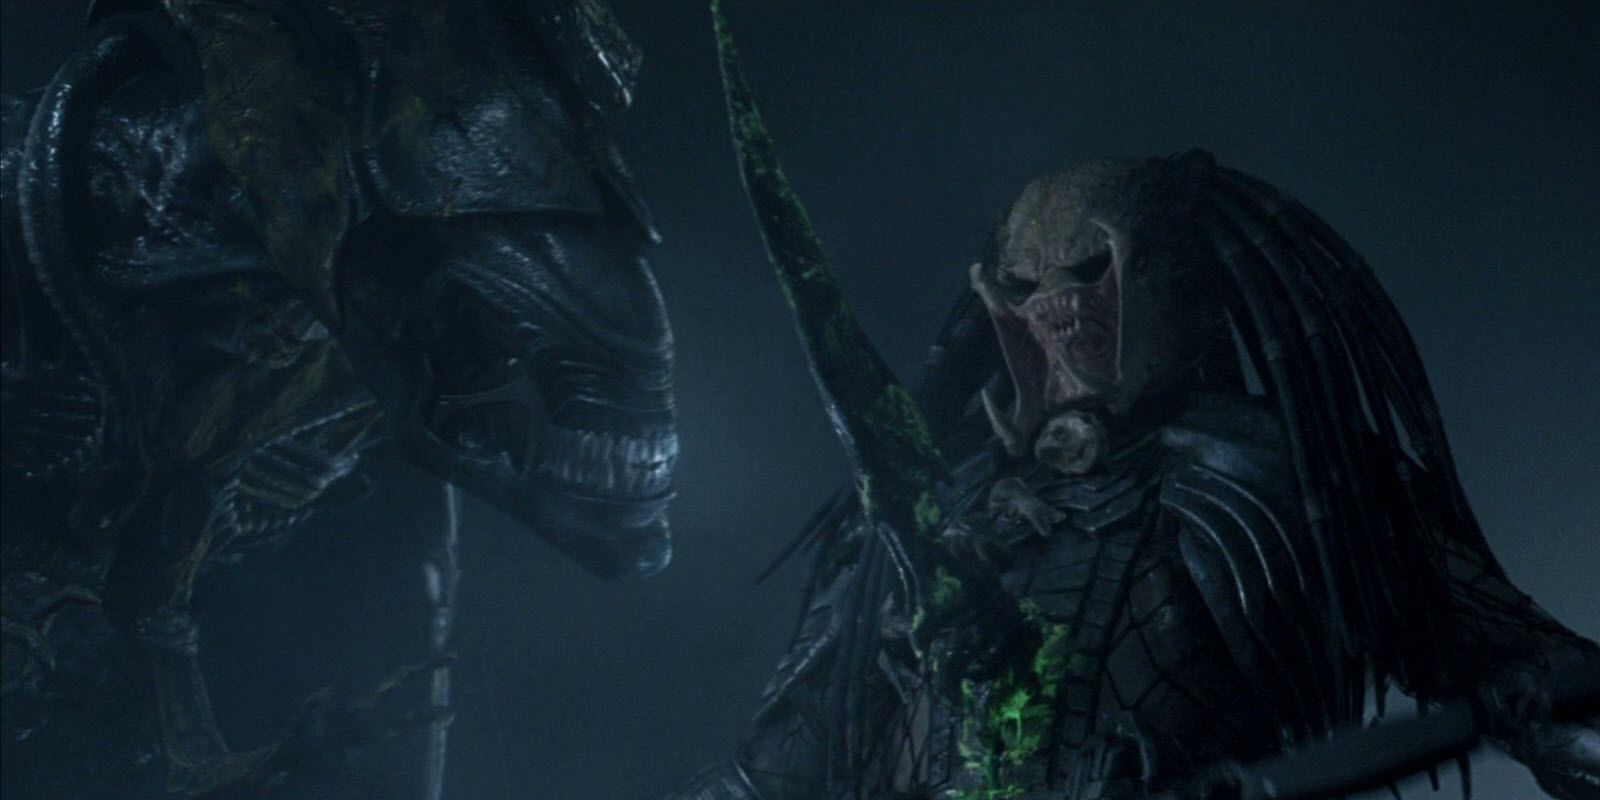 A Predator impaled by a xenomorph, from the AvP film franchise